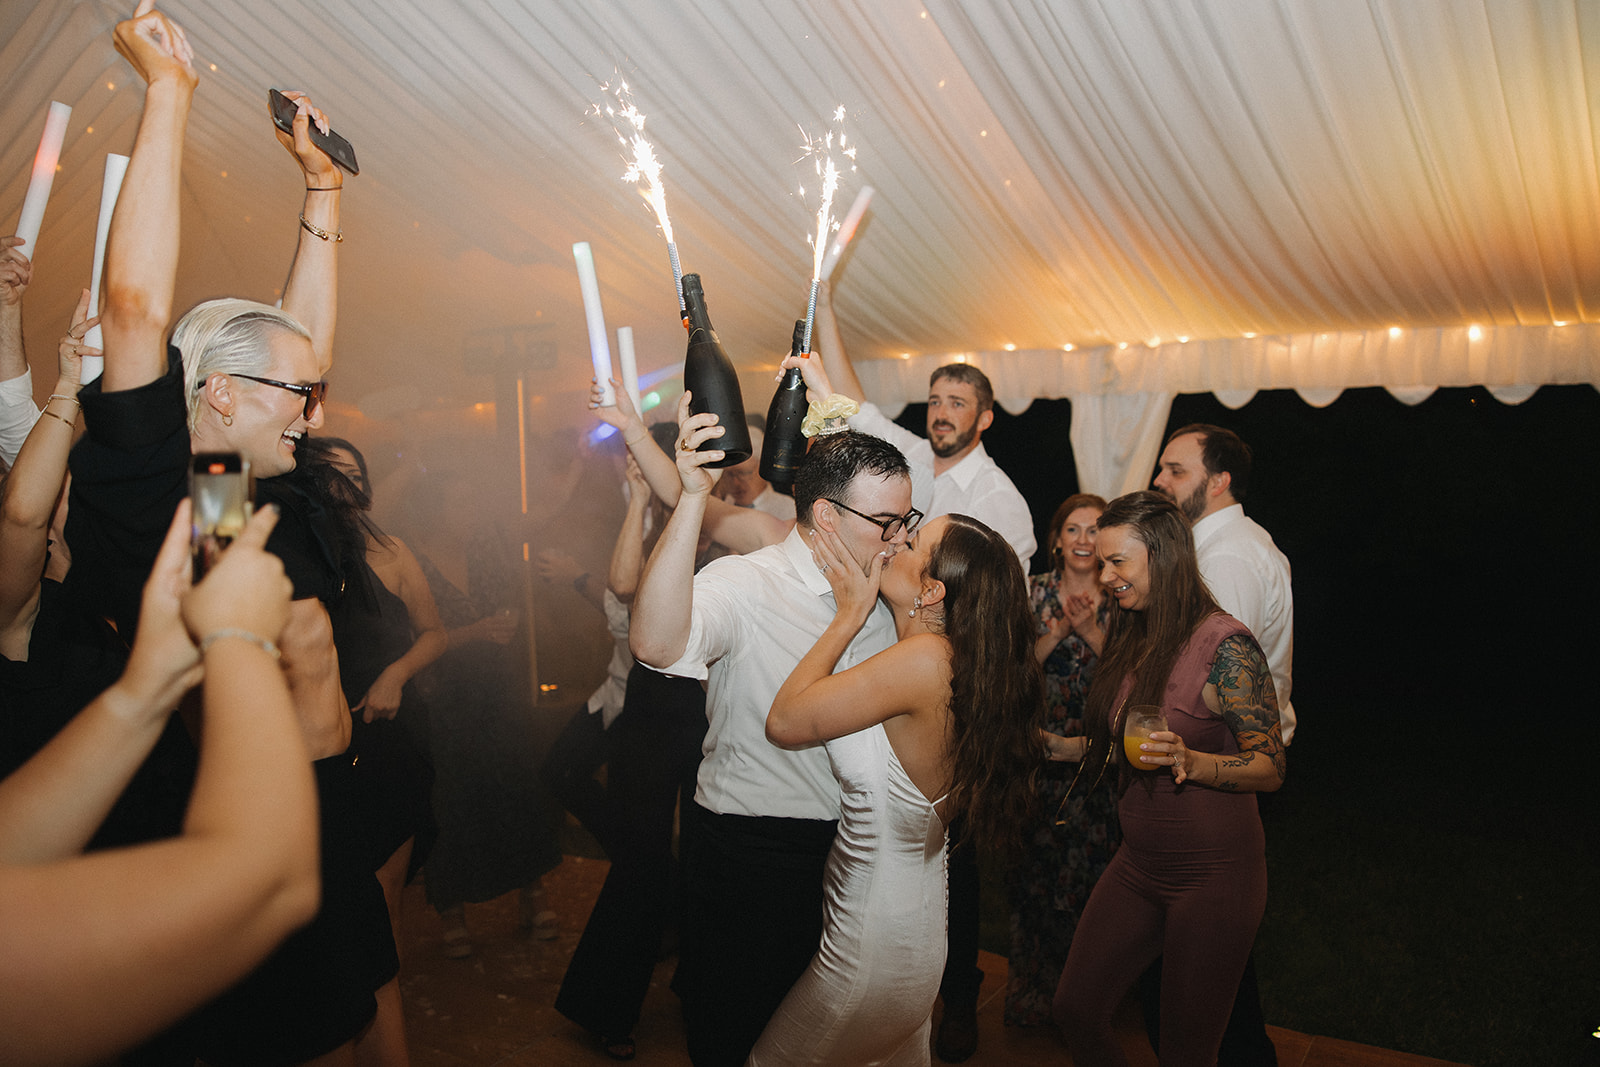 couple dances during reception at outdoor wedding with tent